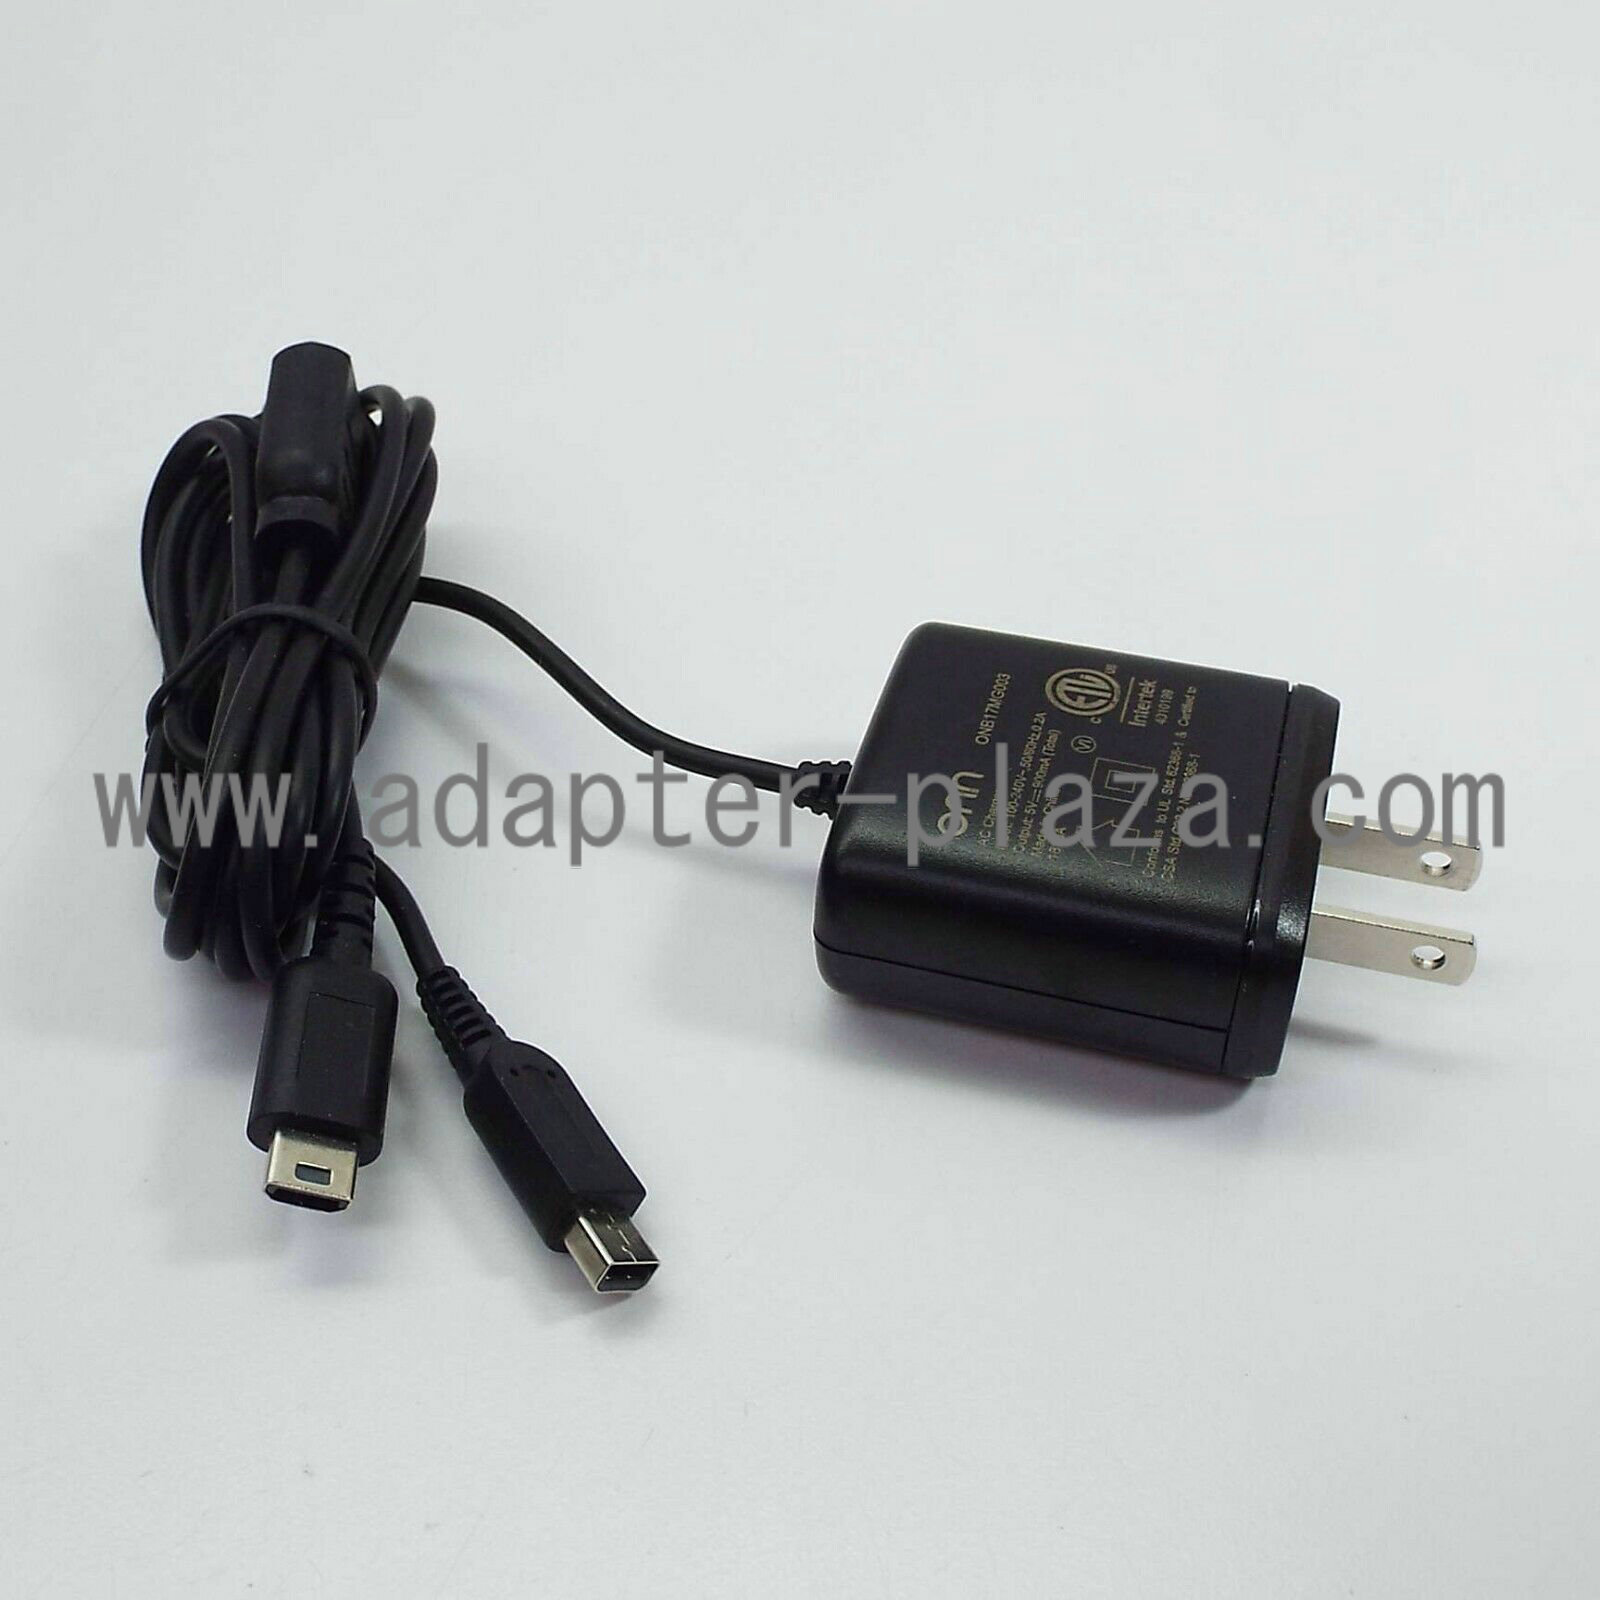 *Brand NEW* Onn ONB17MG003 5V 900mA AC DC Adapter POWER SUPPLY - Click Image to Close